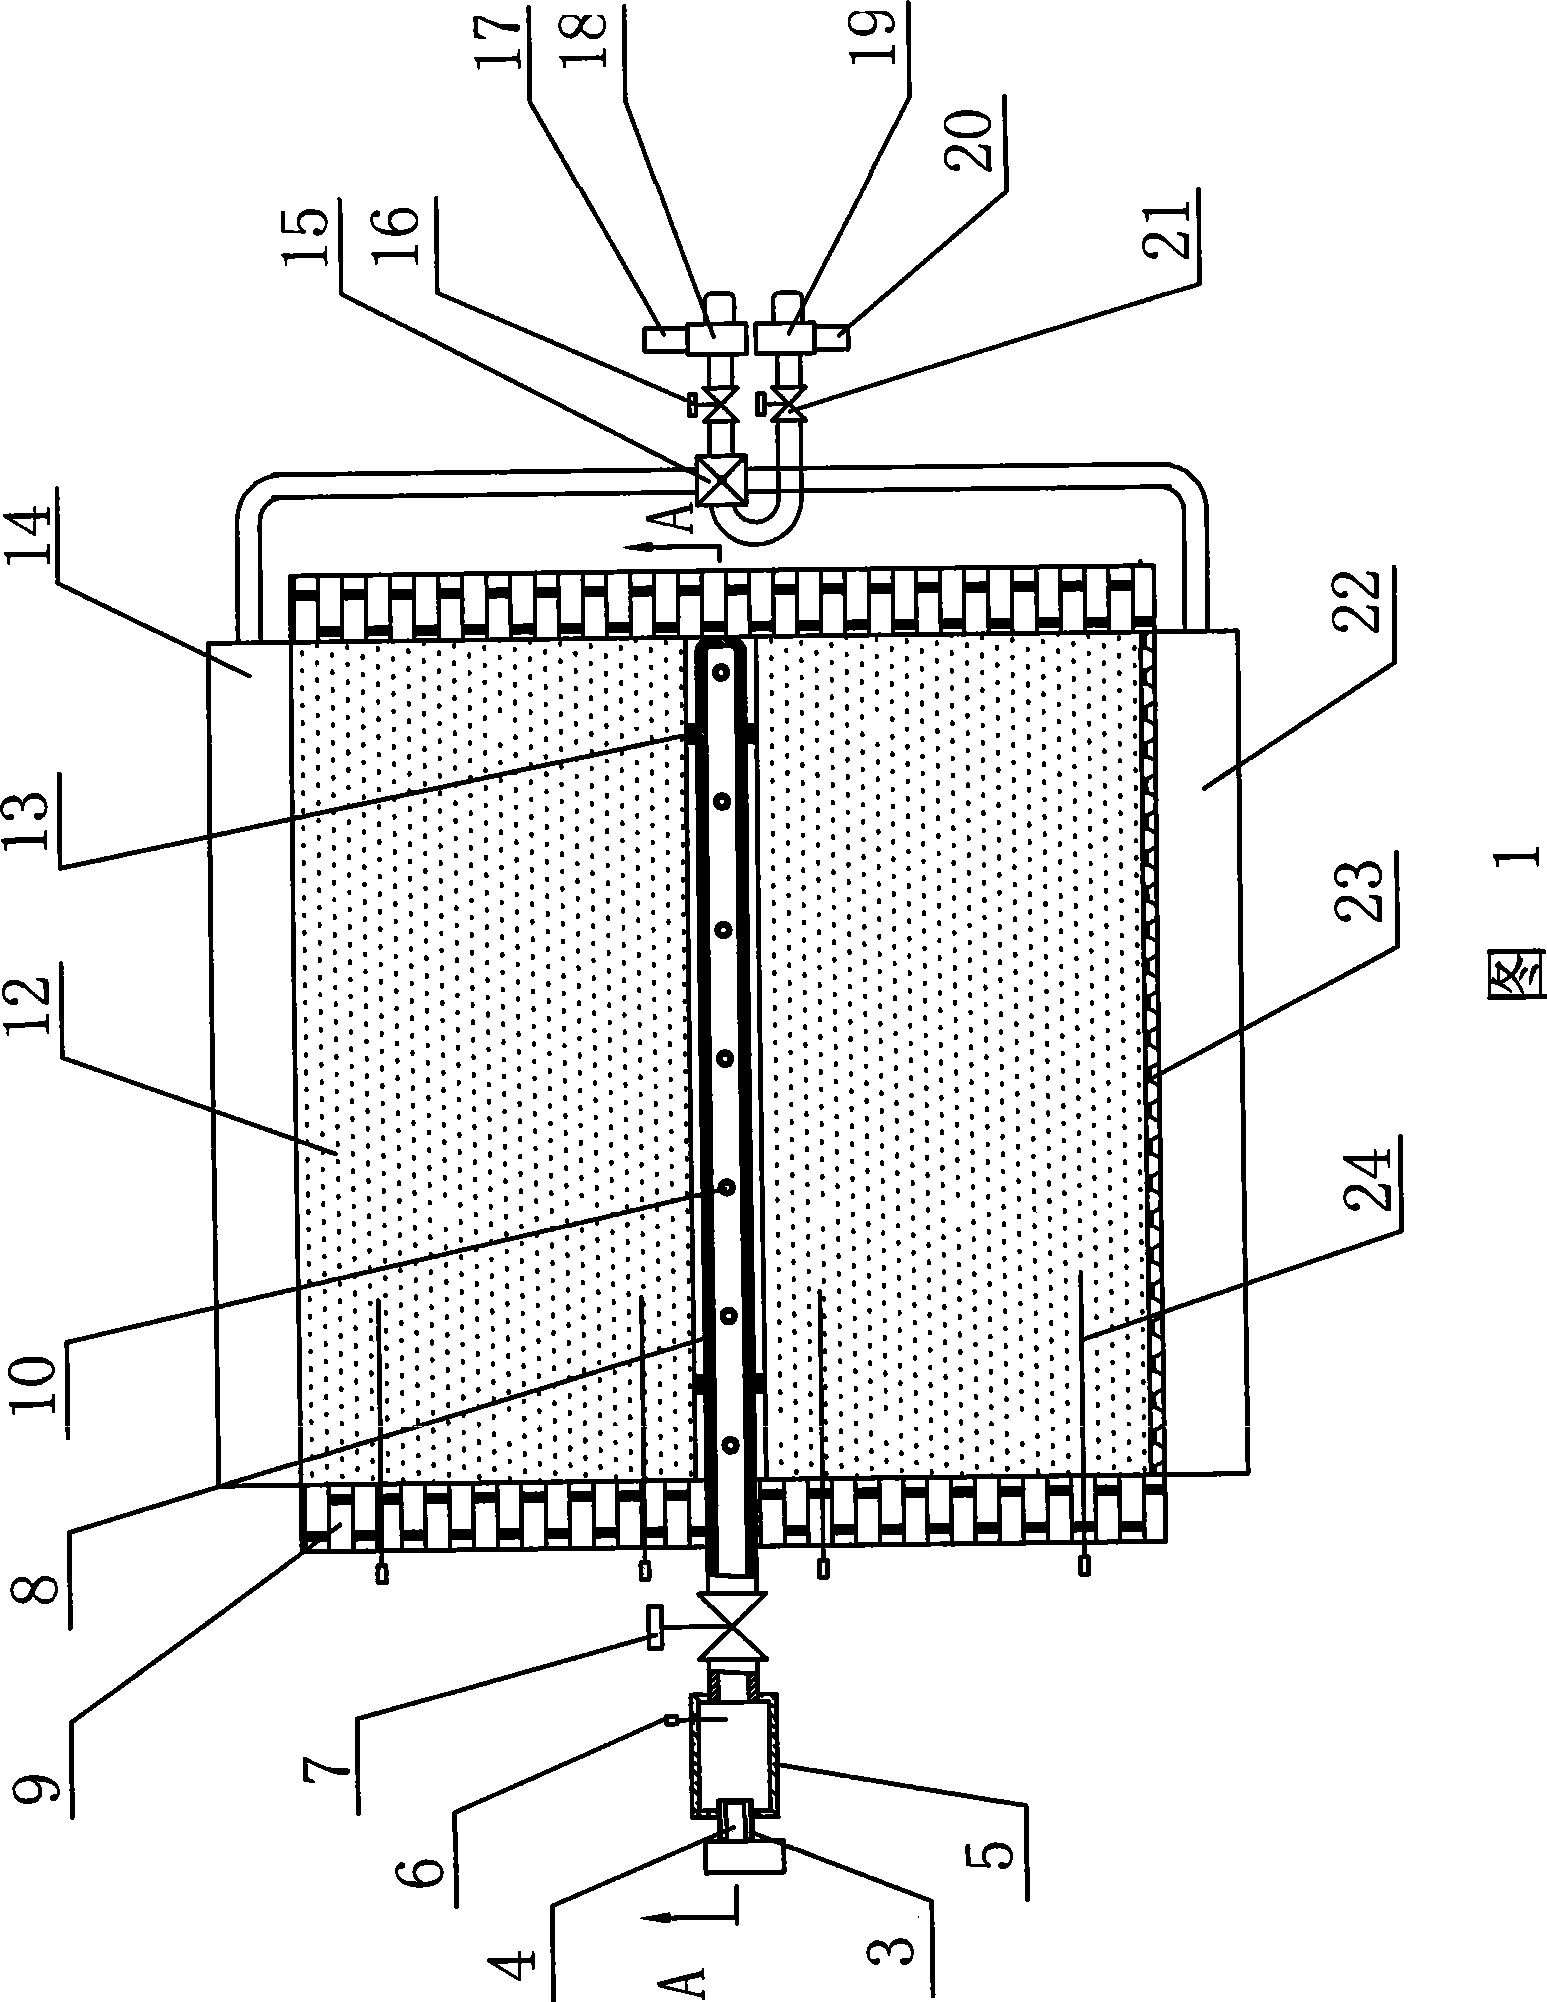 Heating start-up system of mine ventilation air methane oxidized apparatus